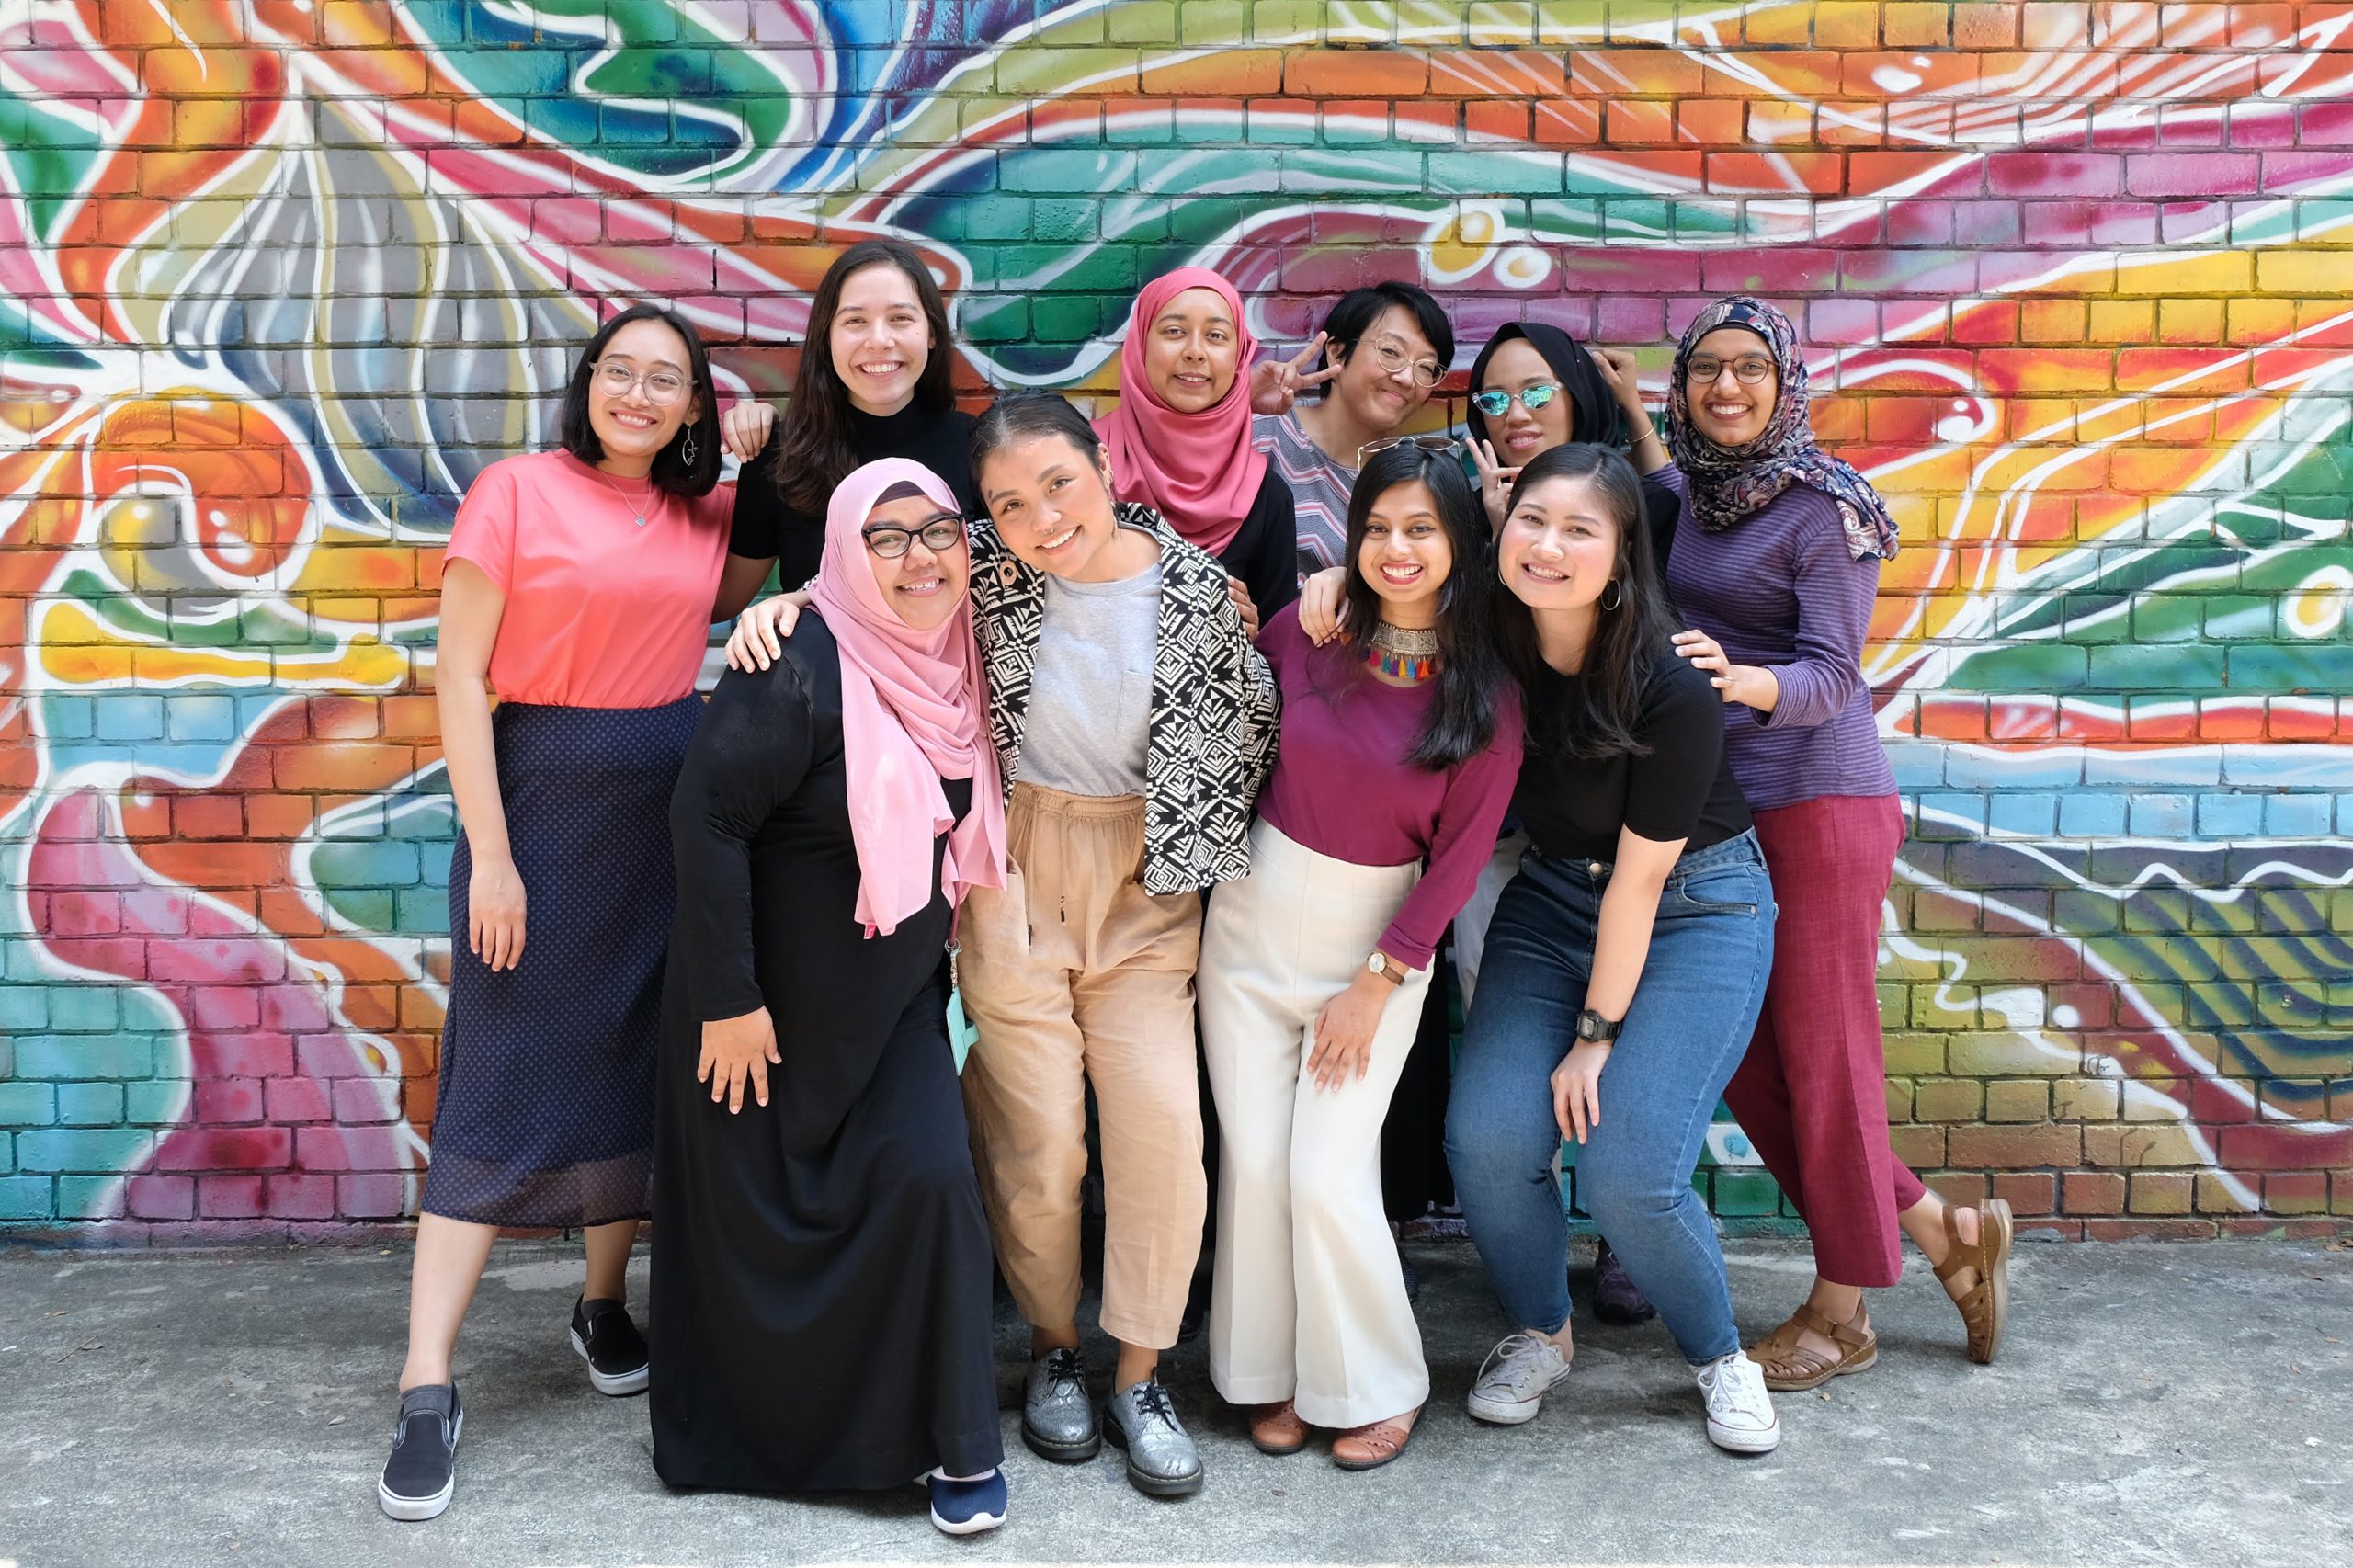 [Tuning In] Founder of The Codette Project, Nurul Hussain, Aims to Redefine Success for Minority/Muslim Women